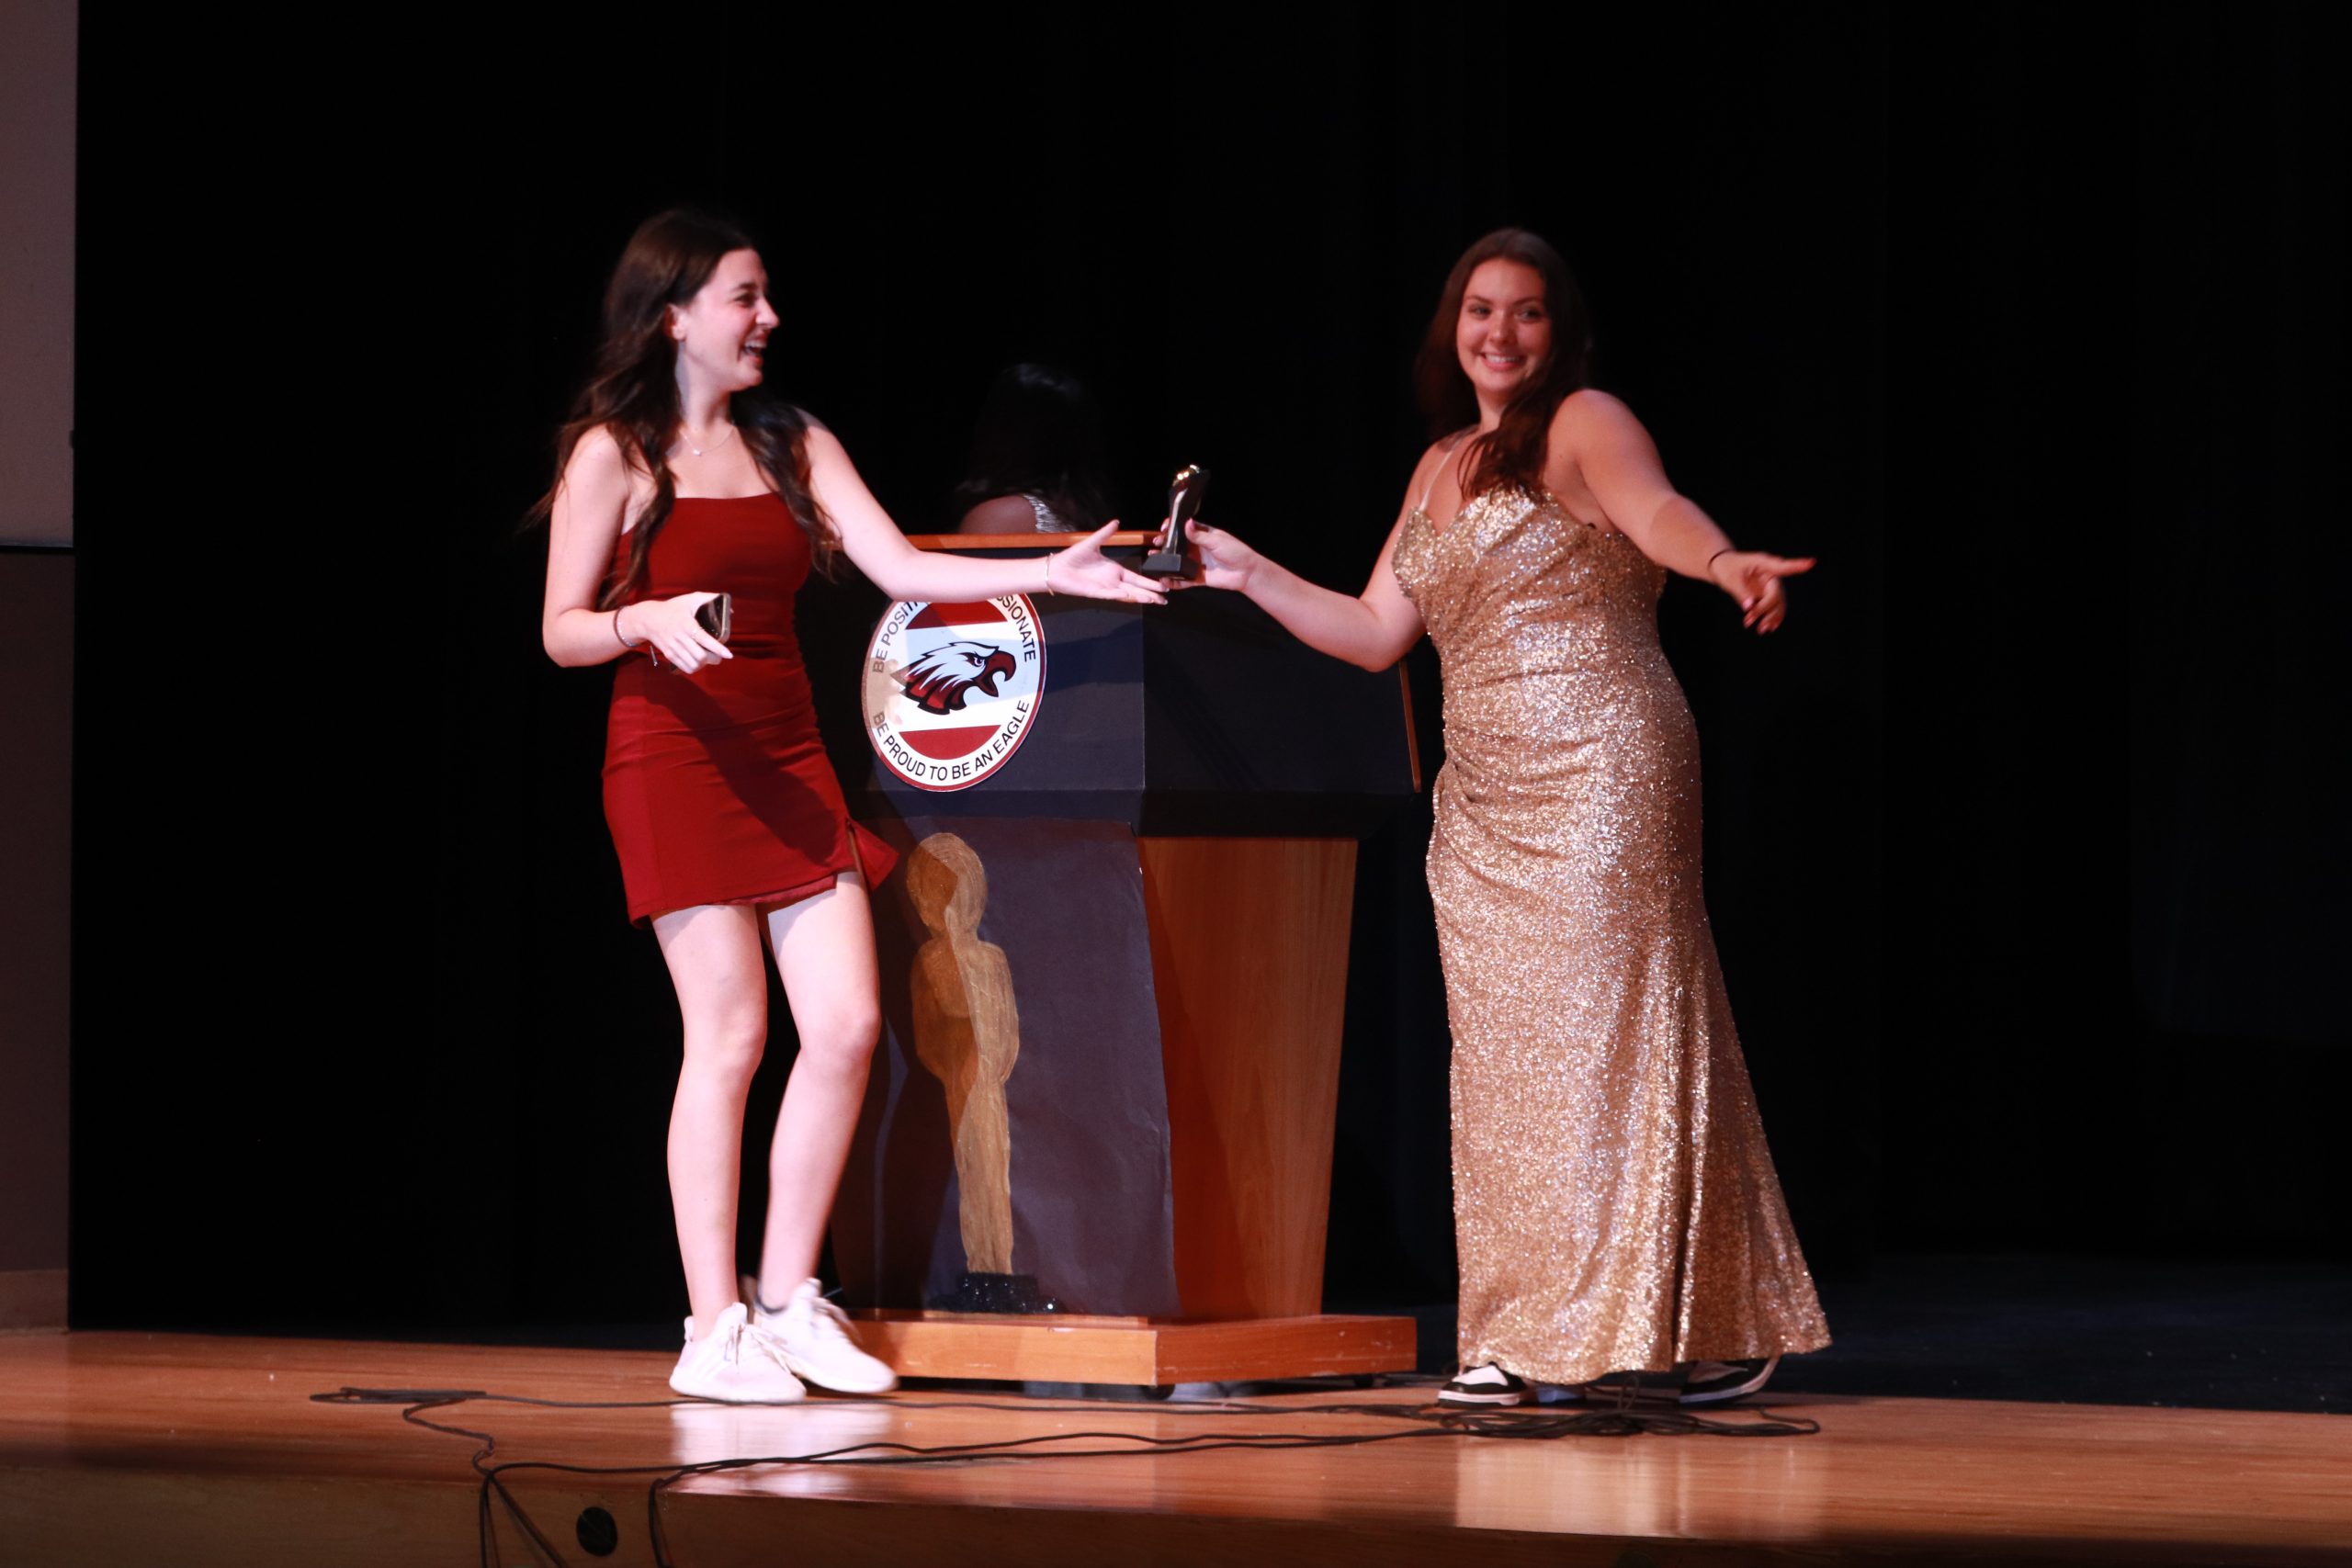 Senior Adriana Pena receives her trophy for the award, Broadway Bound, from Senior Faith Weiss. Weiss acted as the traditional trophy distributor as seen on the Oscars.